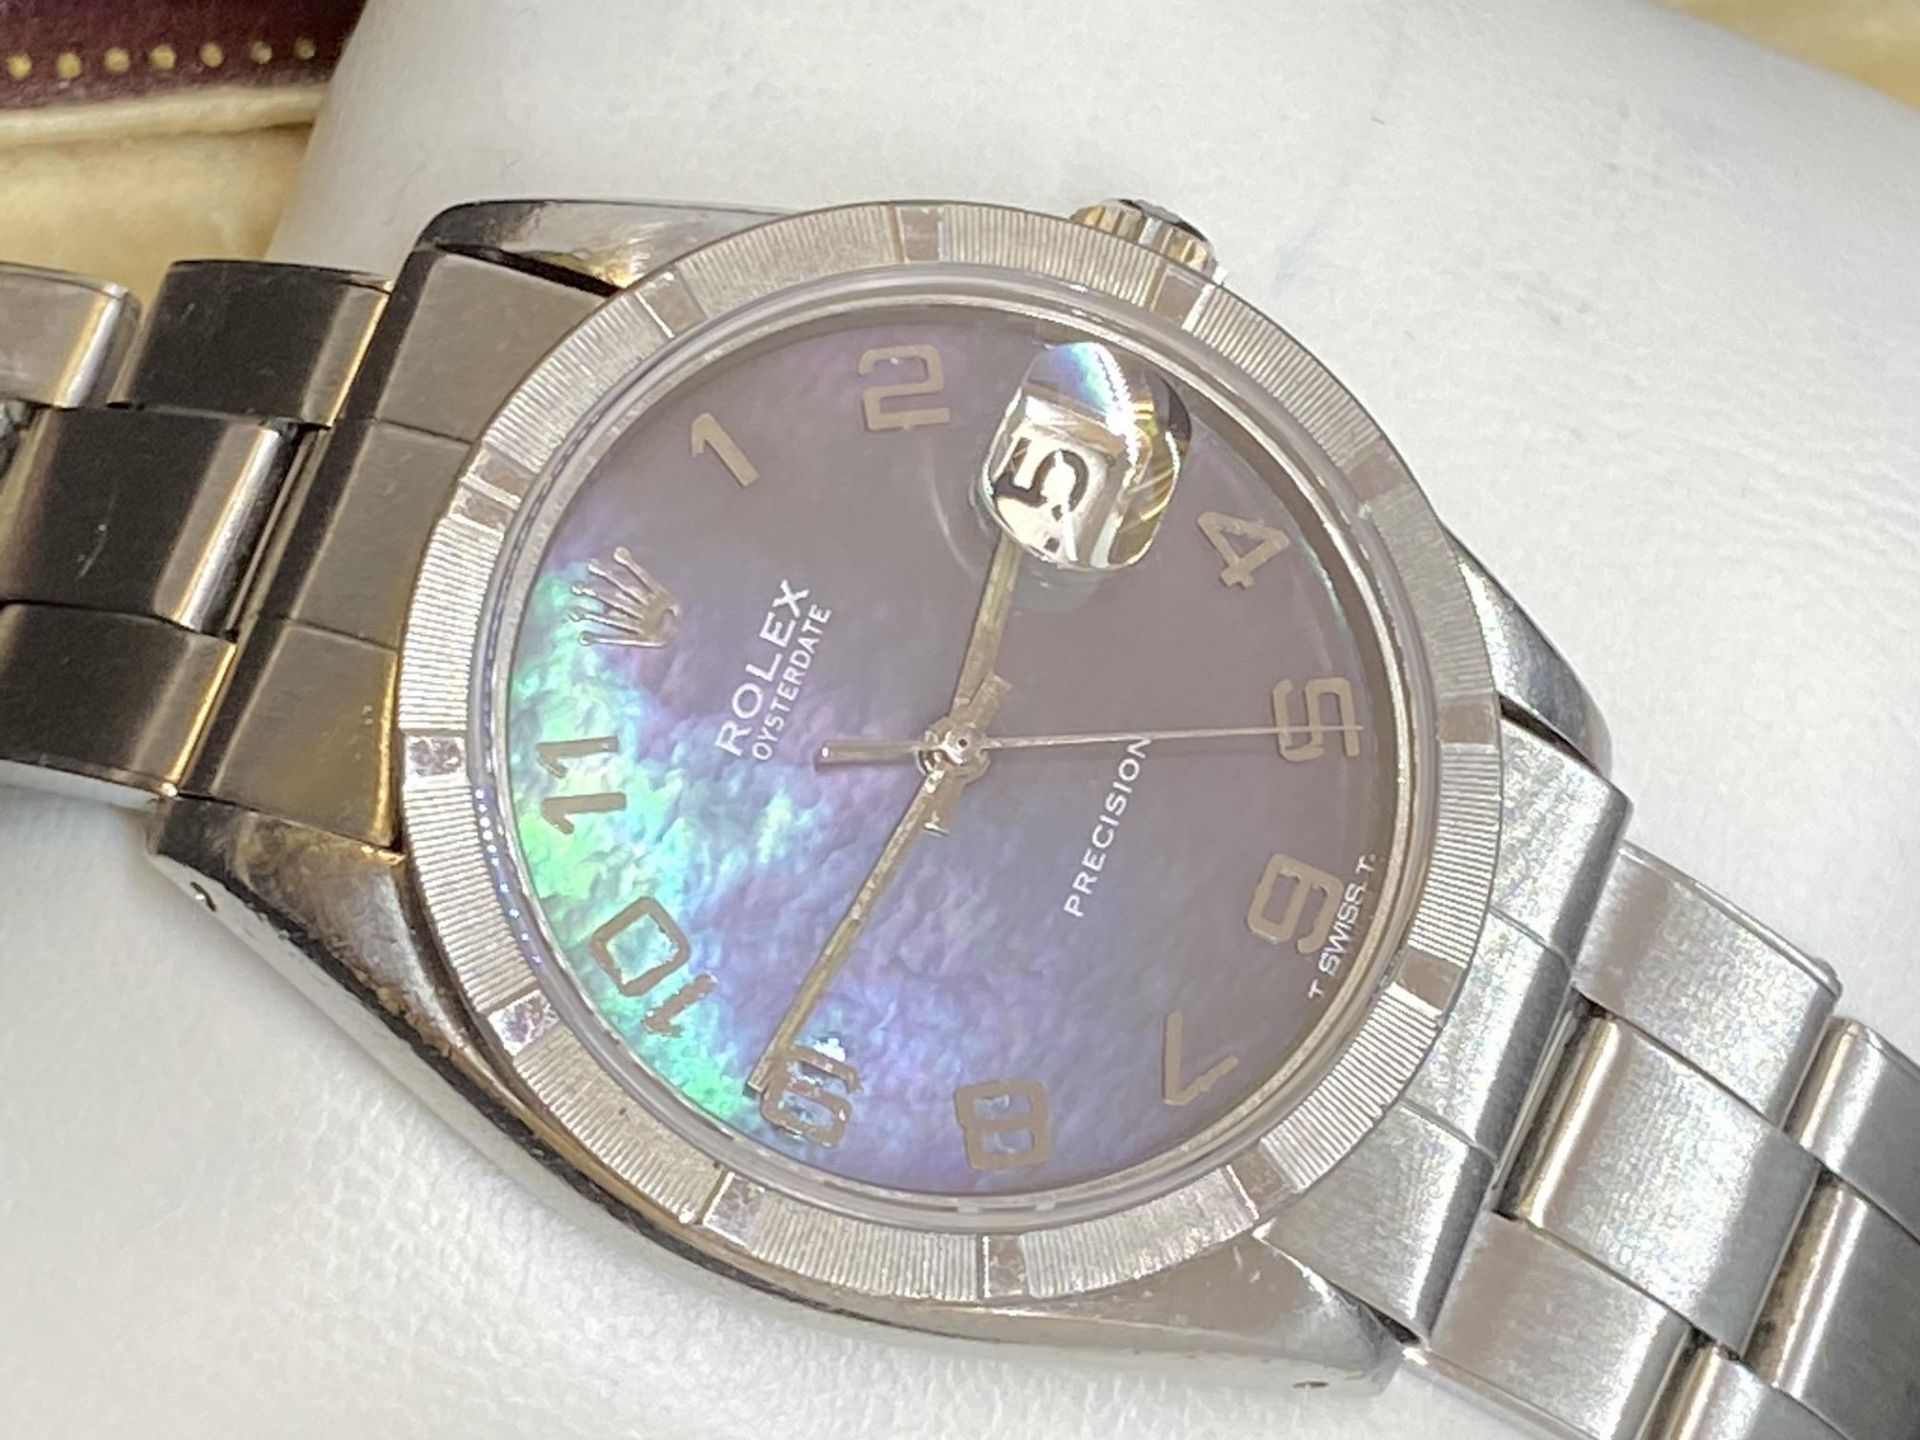 ROLEX OYSTERDATE PRECISION WATCH - Image 8 of 15